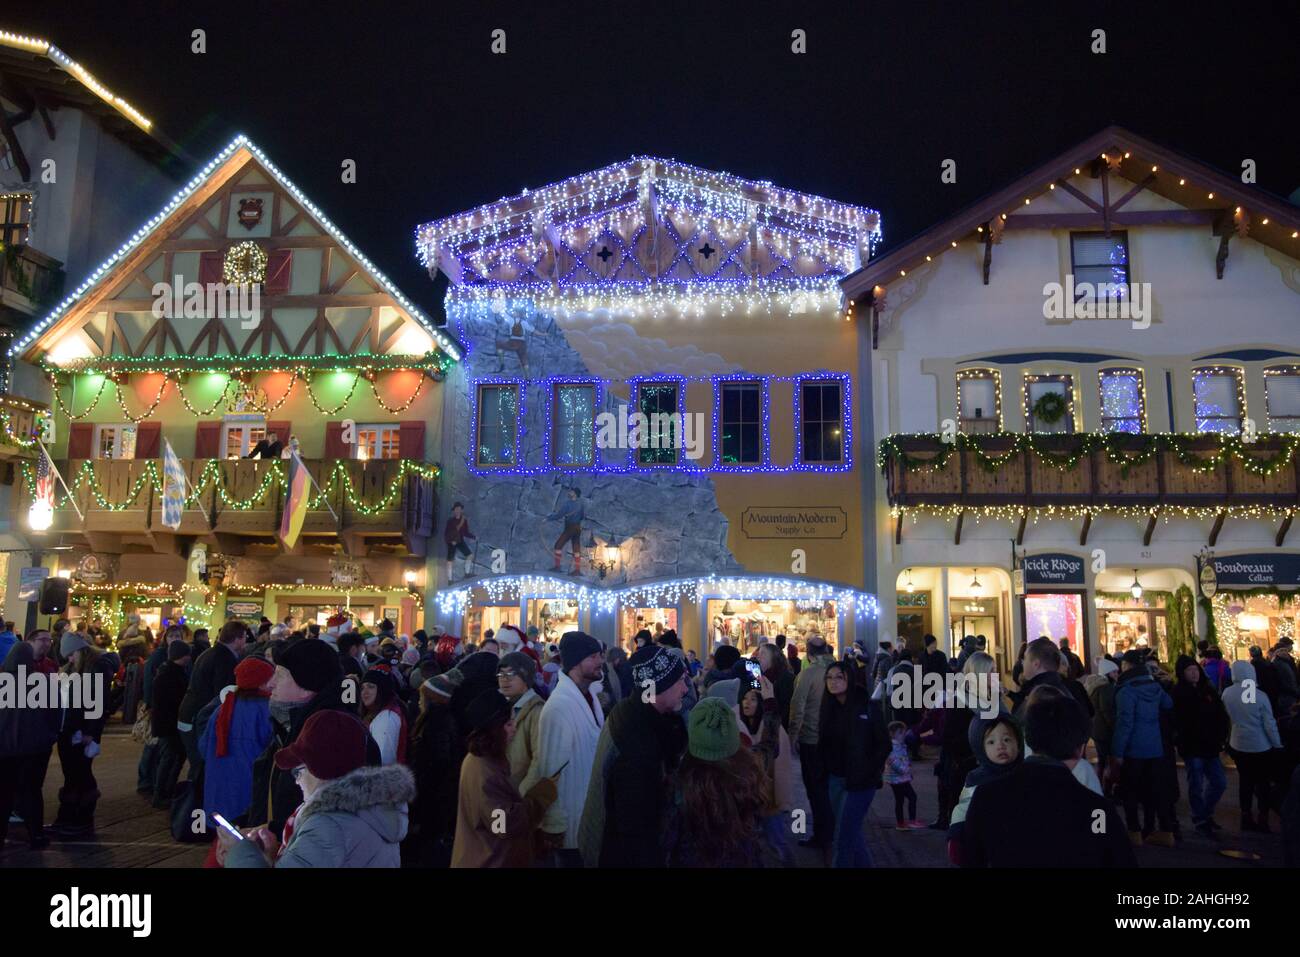 Crowds flock to the Christmas Lighting Festival in Leavenworth, WA--a faux-Bavarian town in the Cascade Mountains and a popular day trip from Seattle. Stock Photo